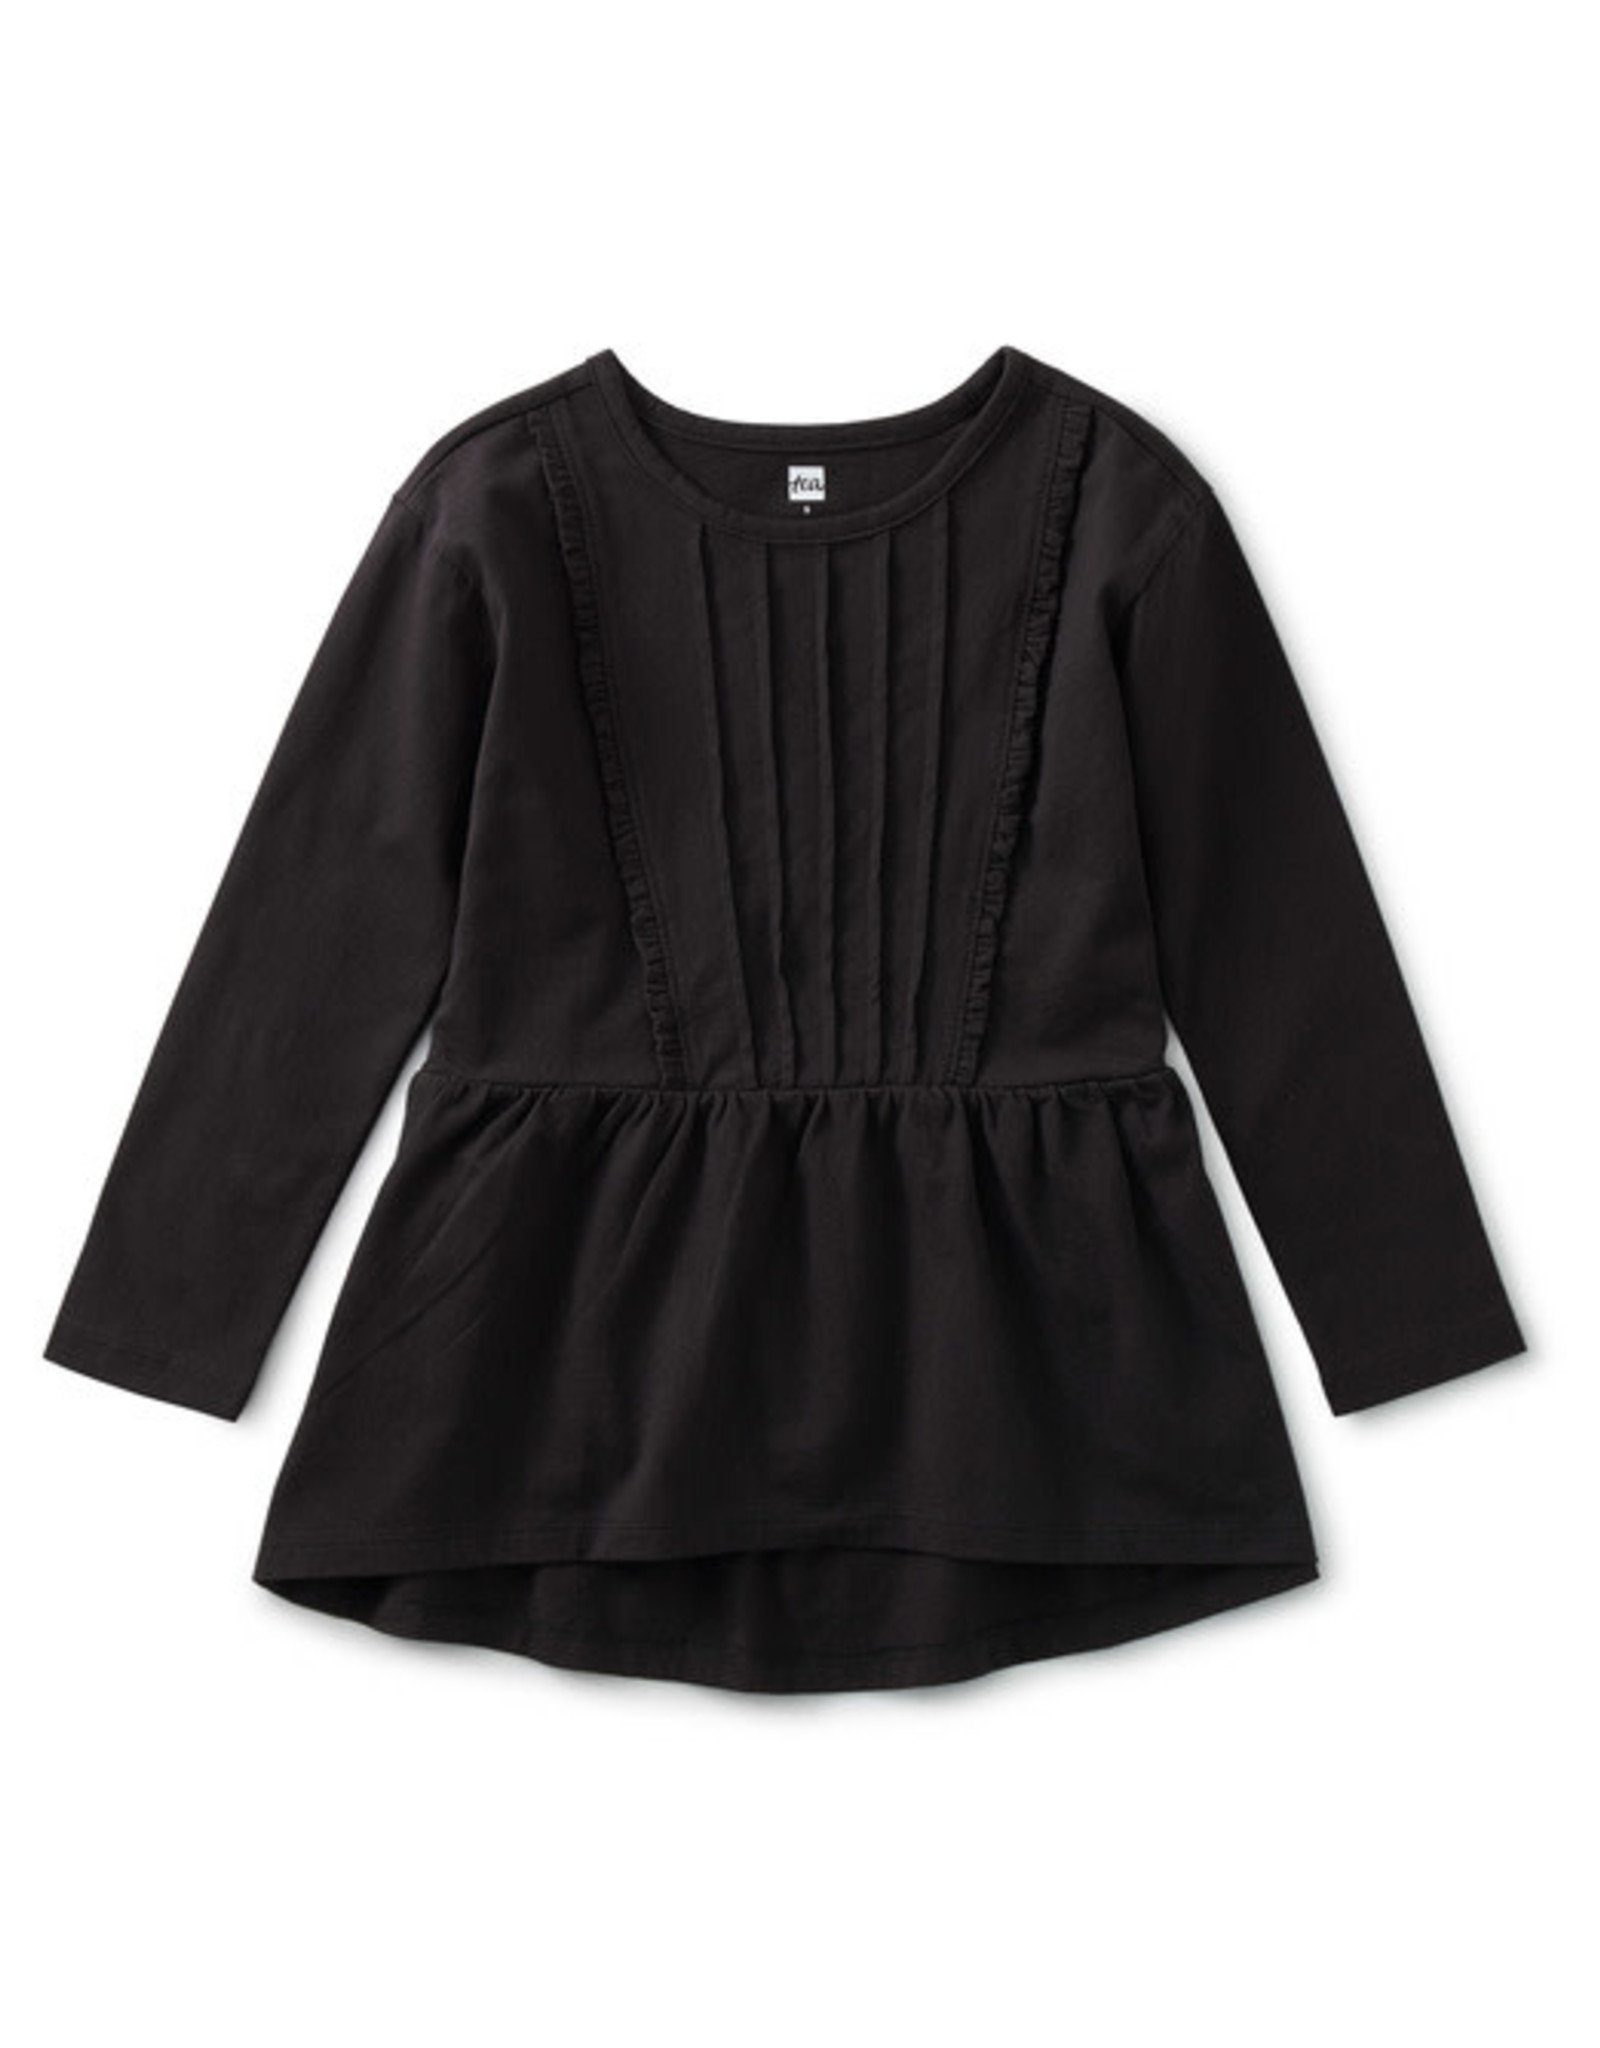 Tea Collection Pleated Pintuck Top - Jet Black